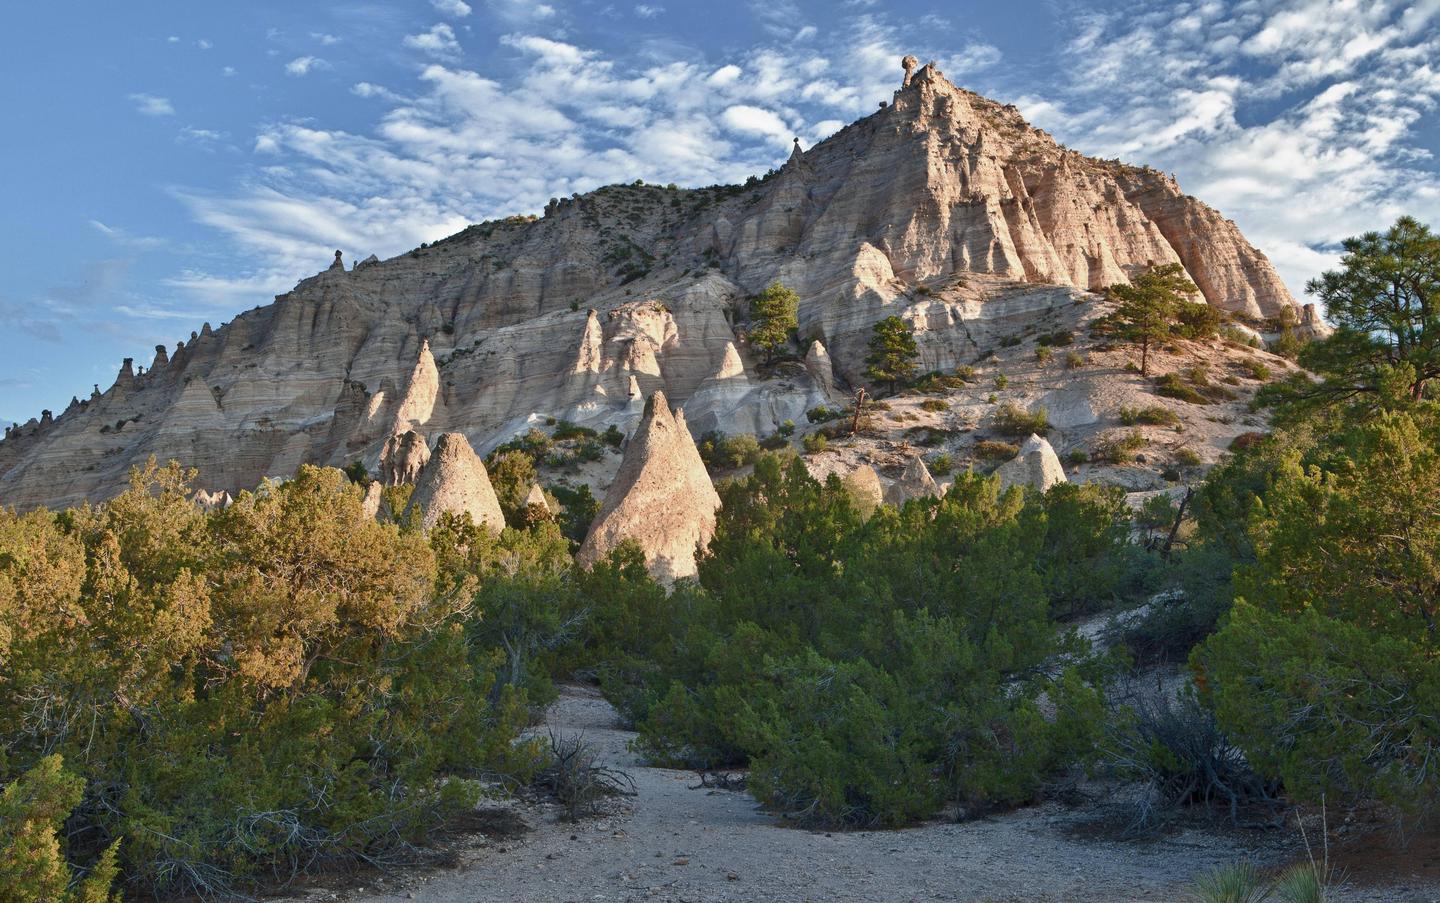 Tent rocks as the shadows fall on the landscape